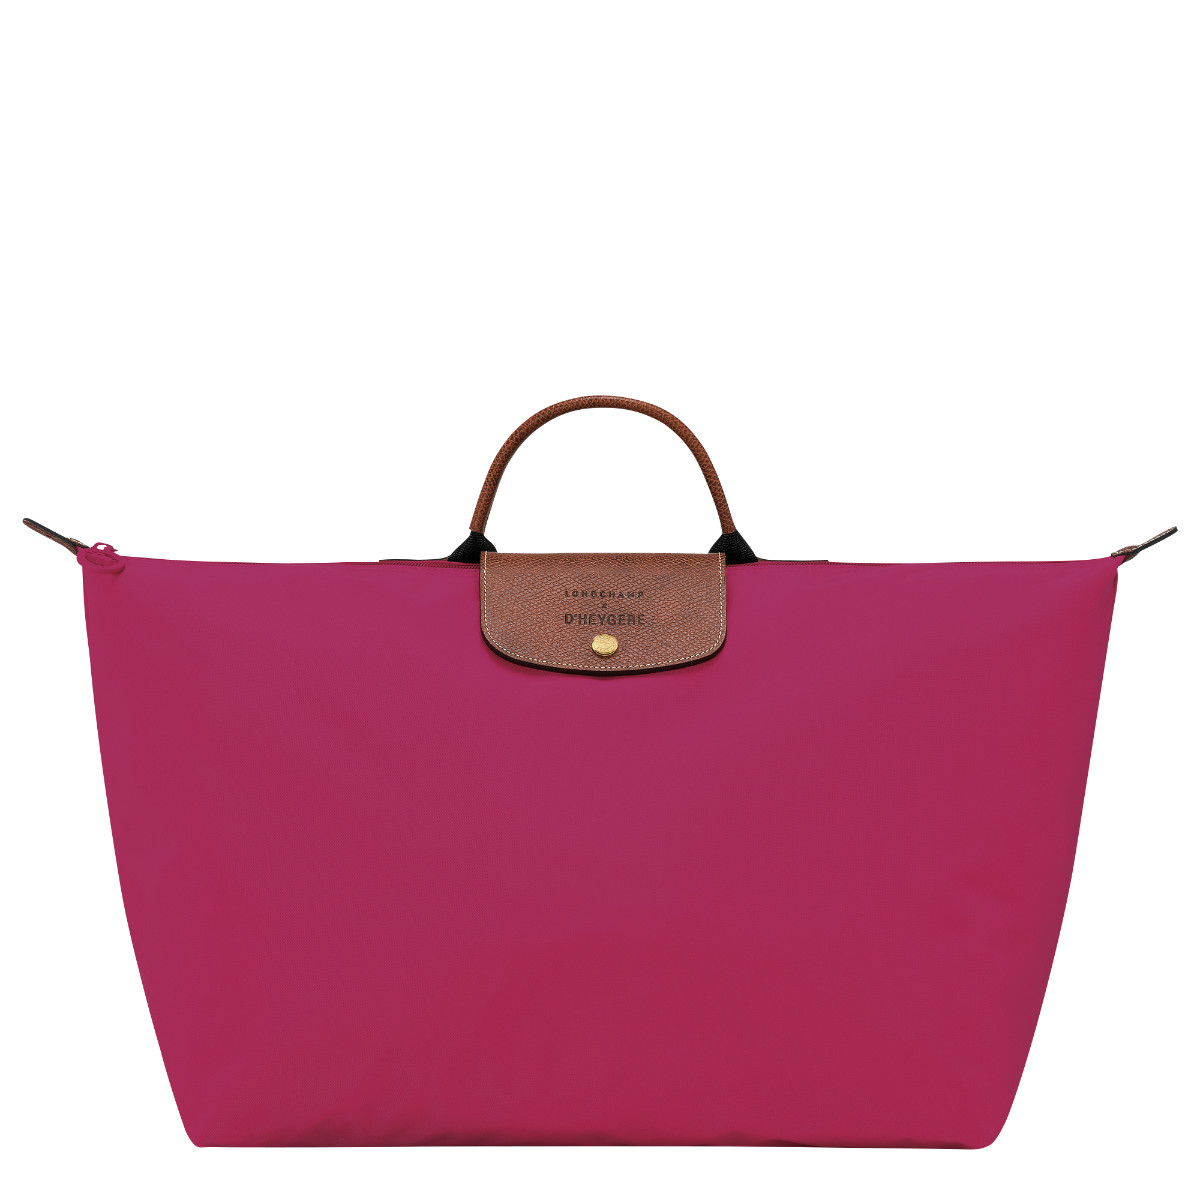 Longchamp & D’heygere - The Ingenious Collaboration That Transforms The Everyday